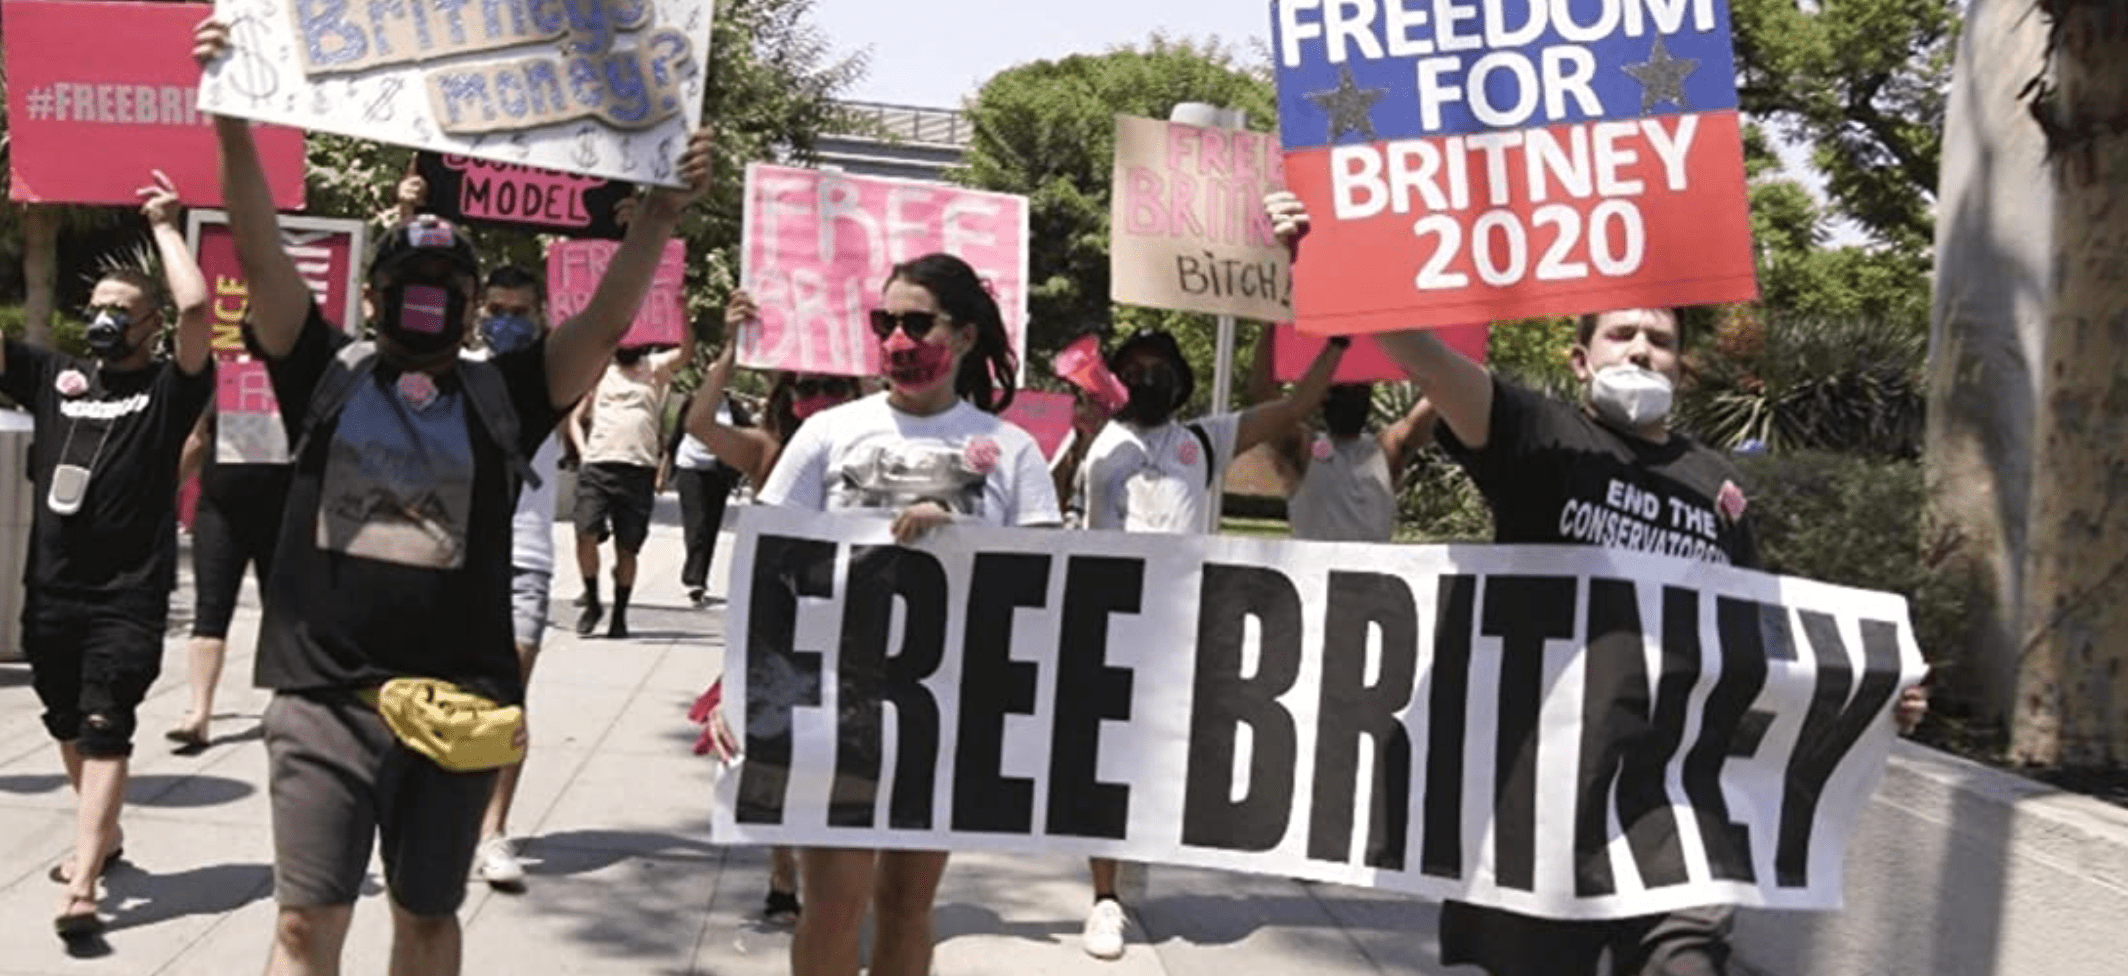 Protesters demand Britney Spears’ independence in this image from Hulu 